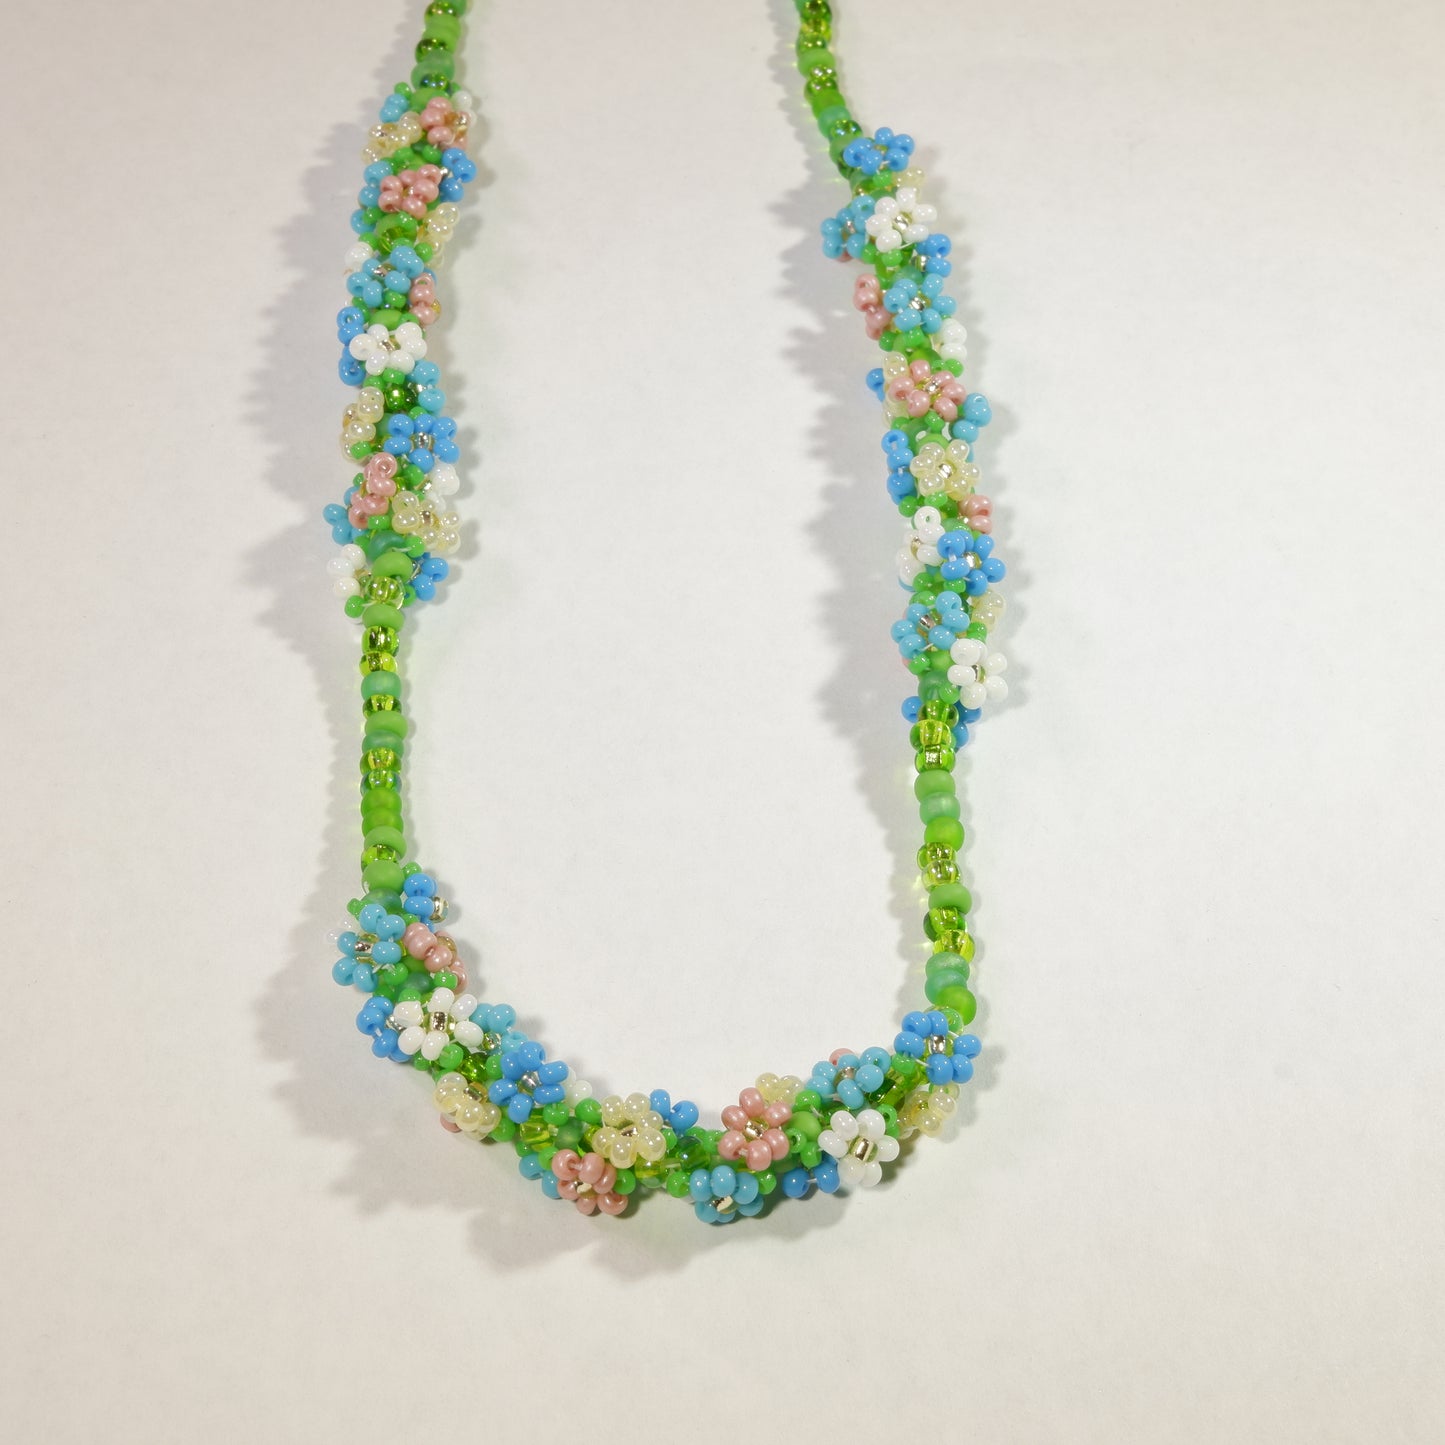 Daisy Rope Necklace